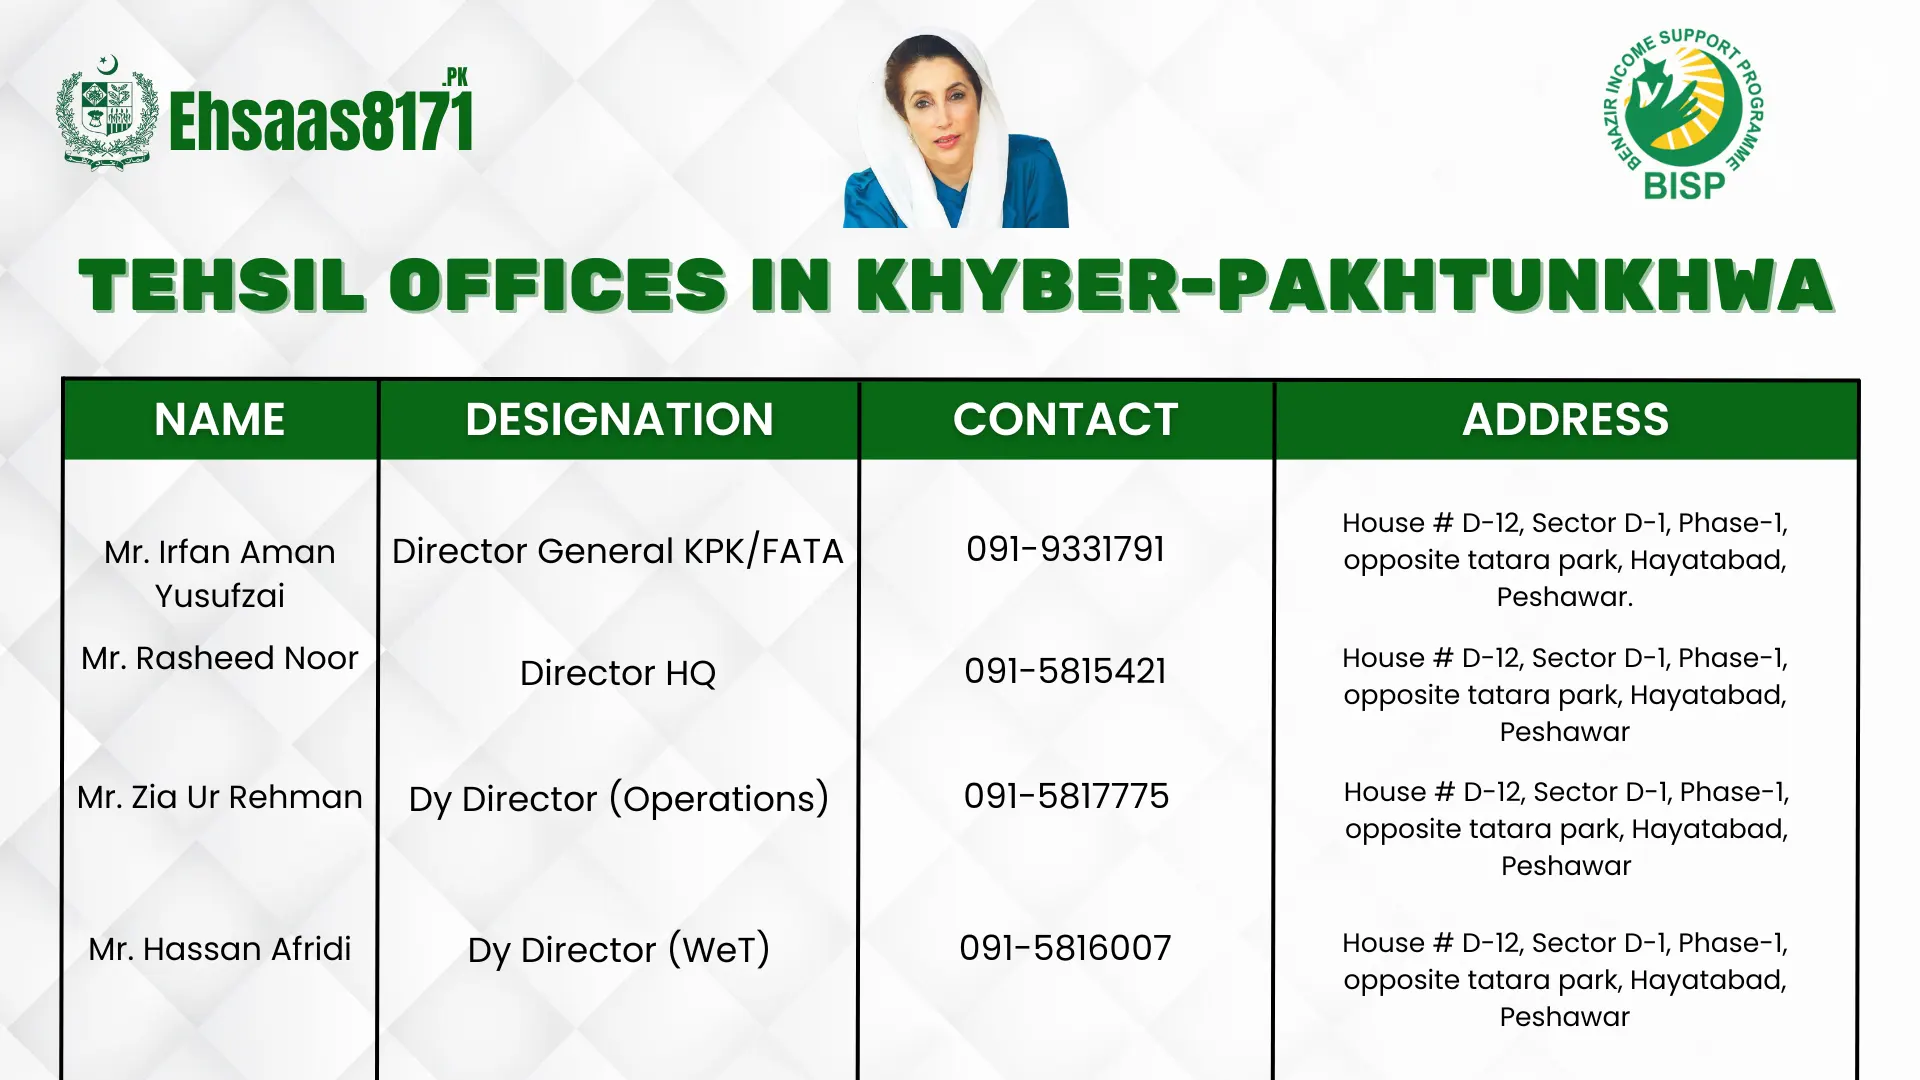 Tehsil Offices in Khyber-Pakhtunkhwa